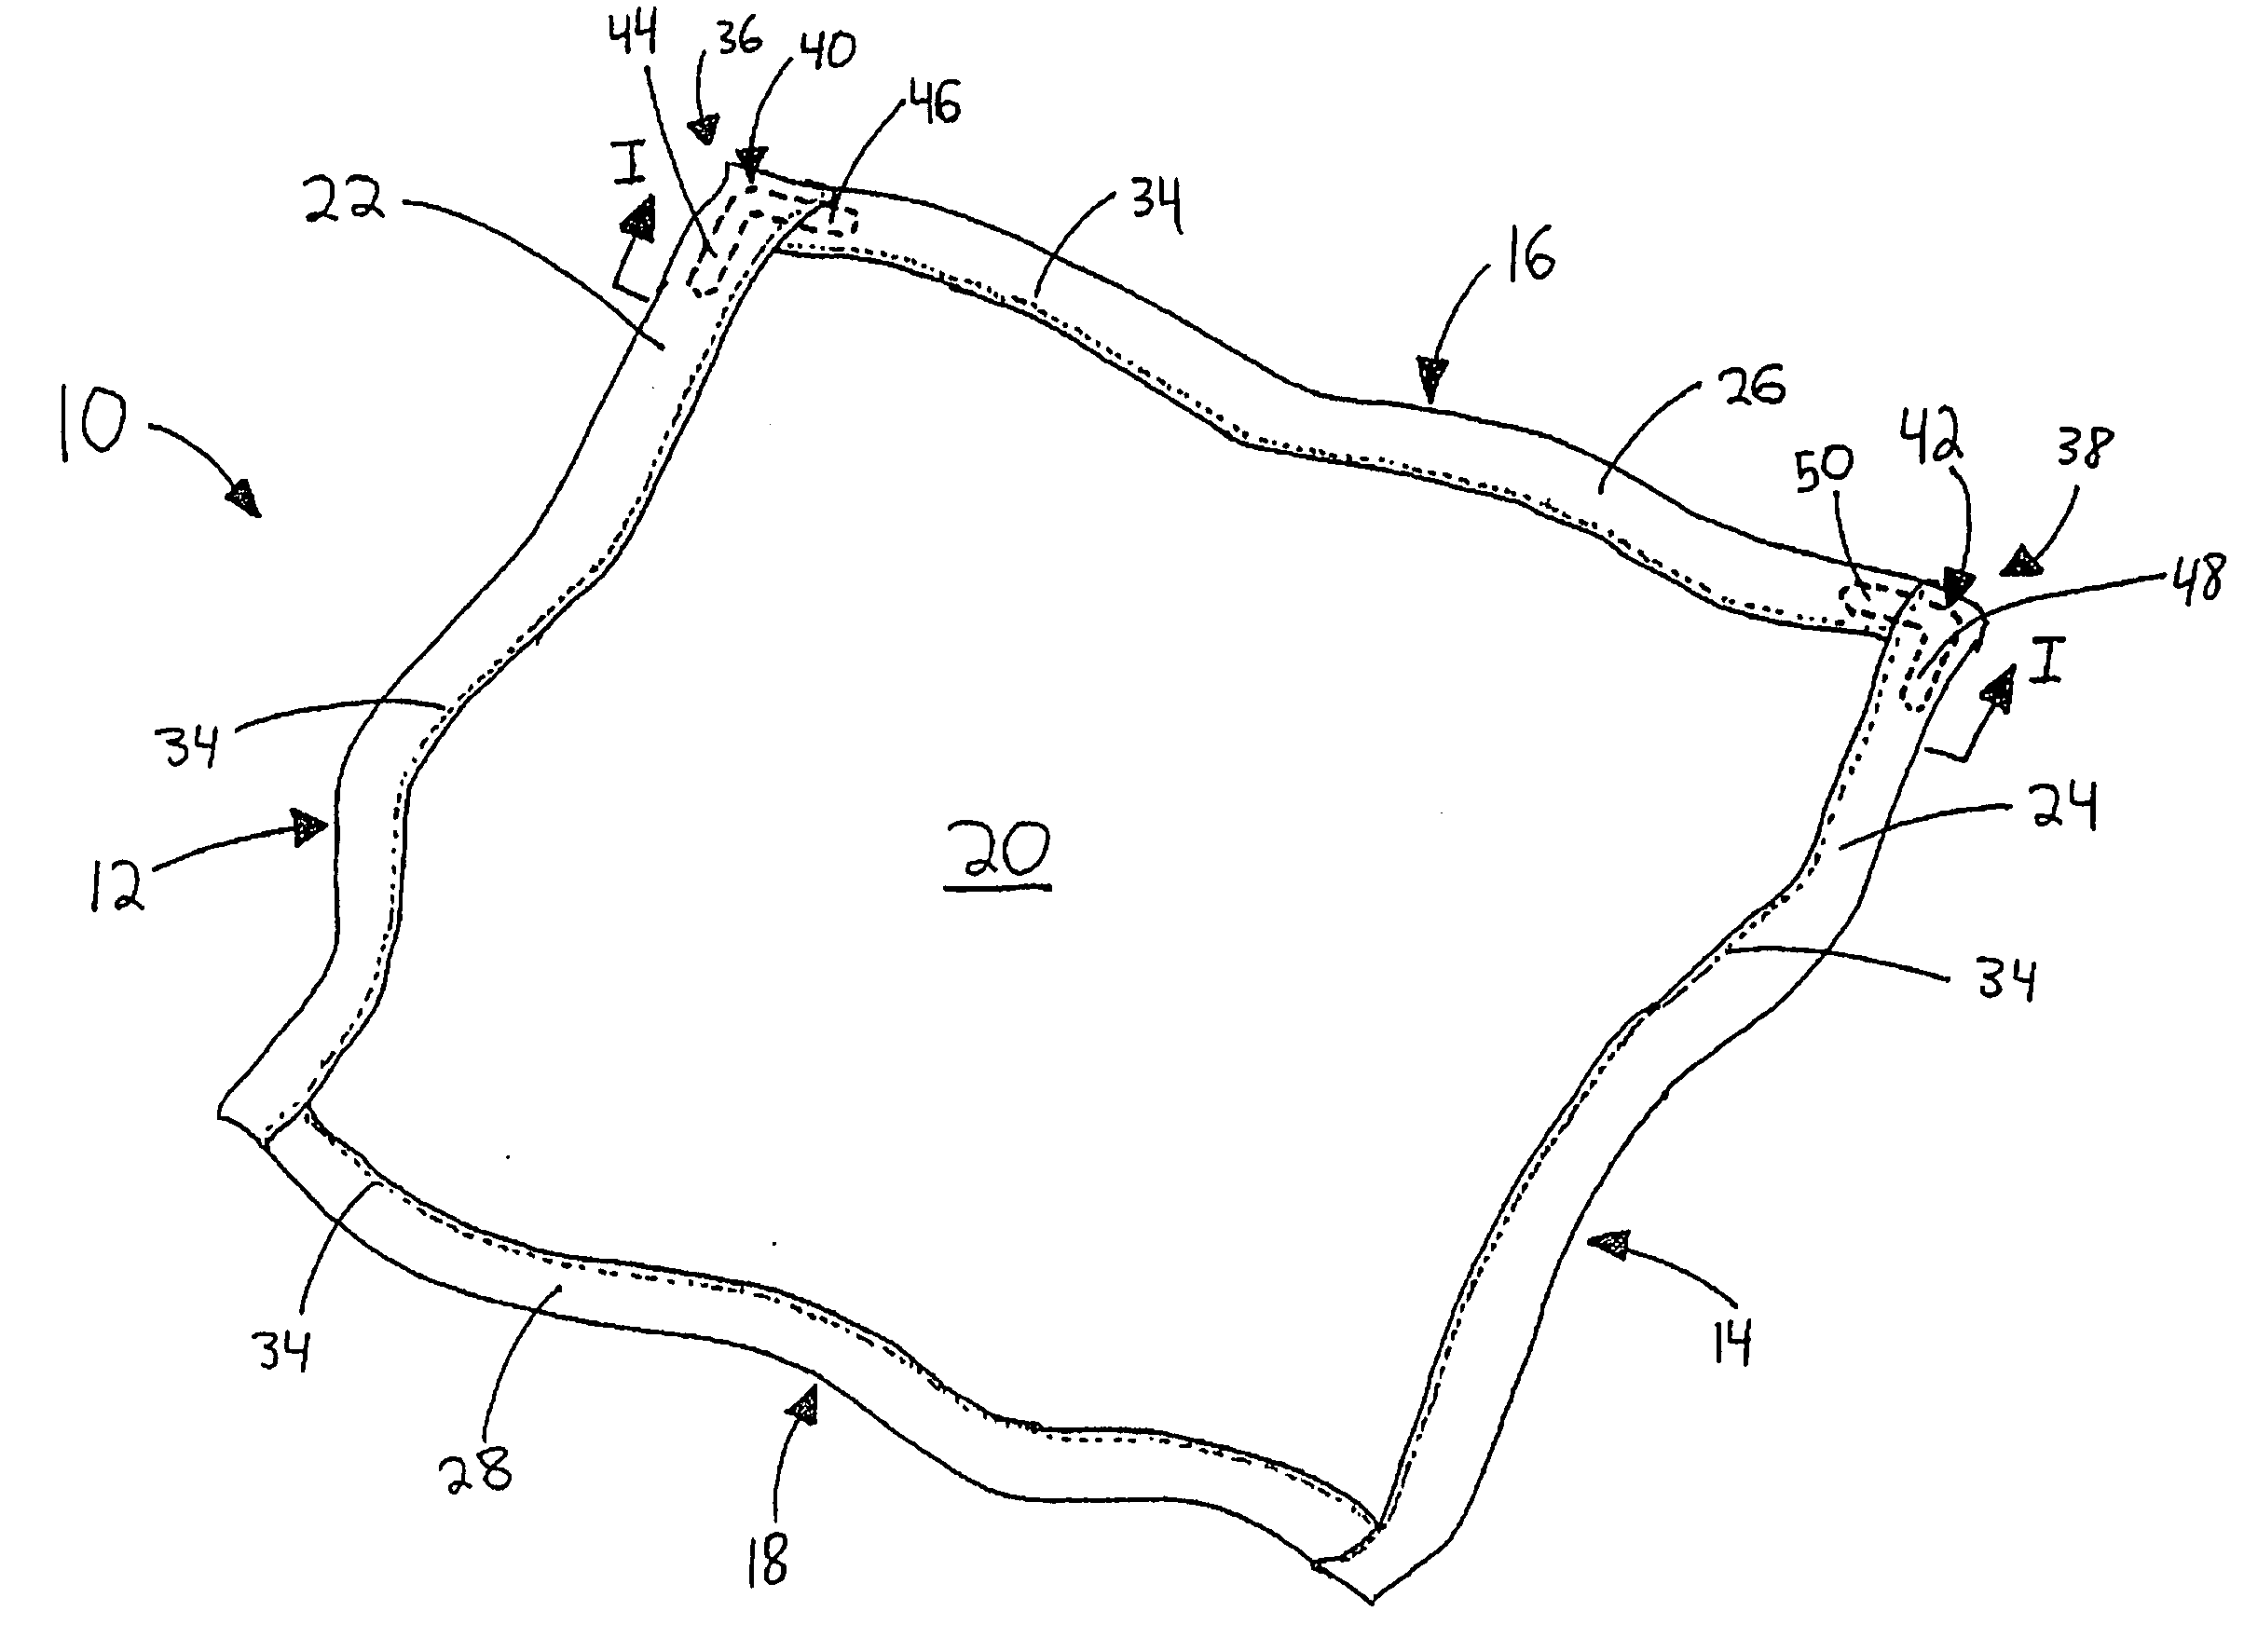 Surgical towel having radiopaque element and methods for making same